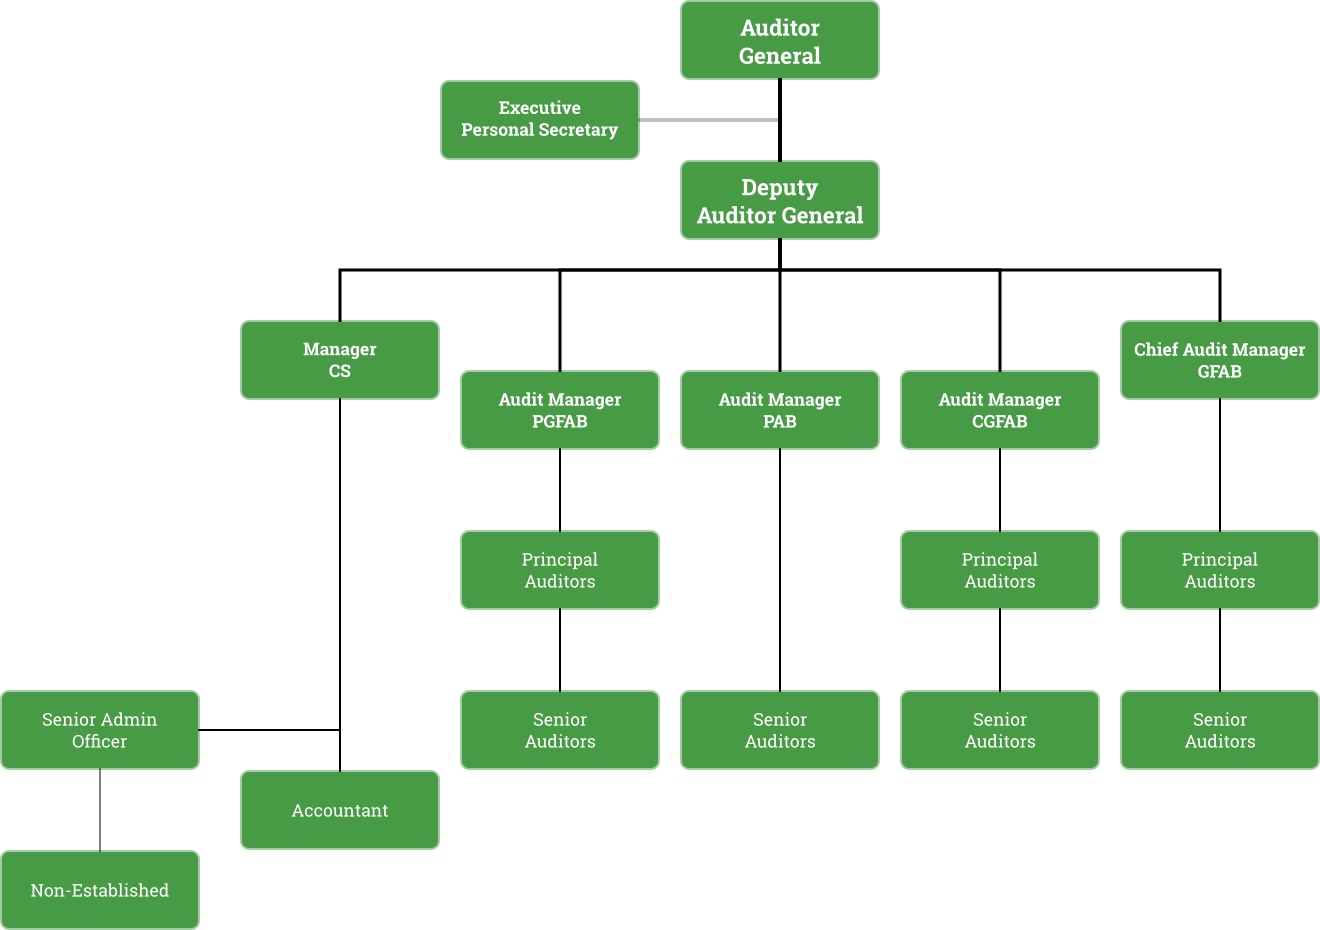 Office of the Auditor General - Organisational Structure